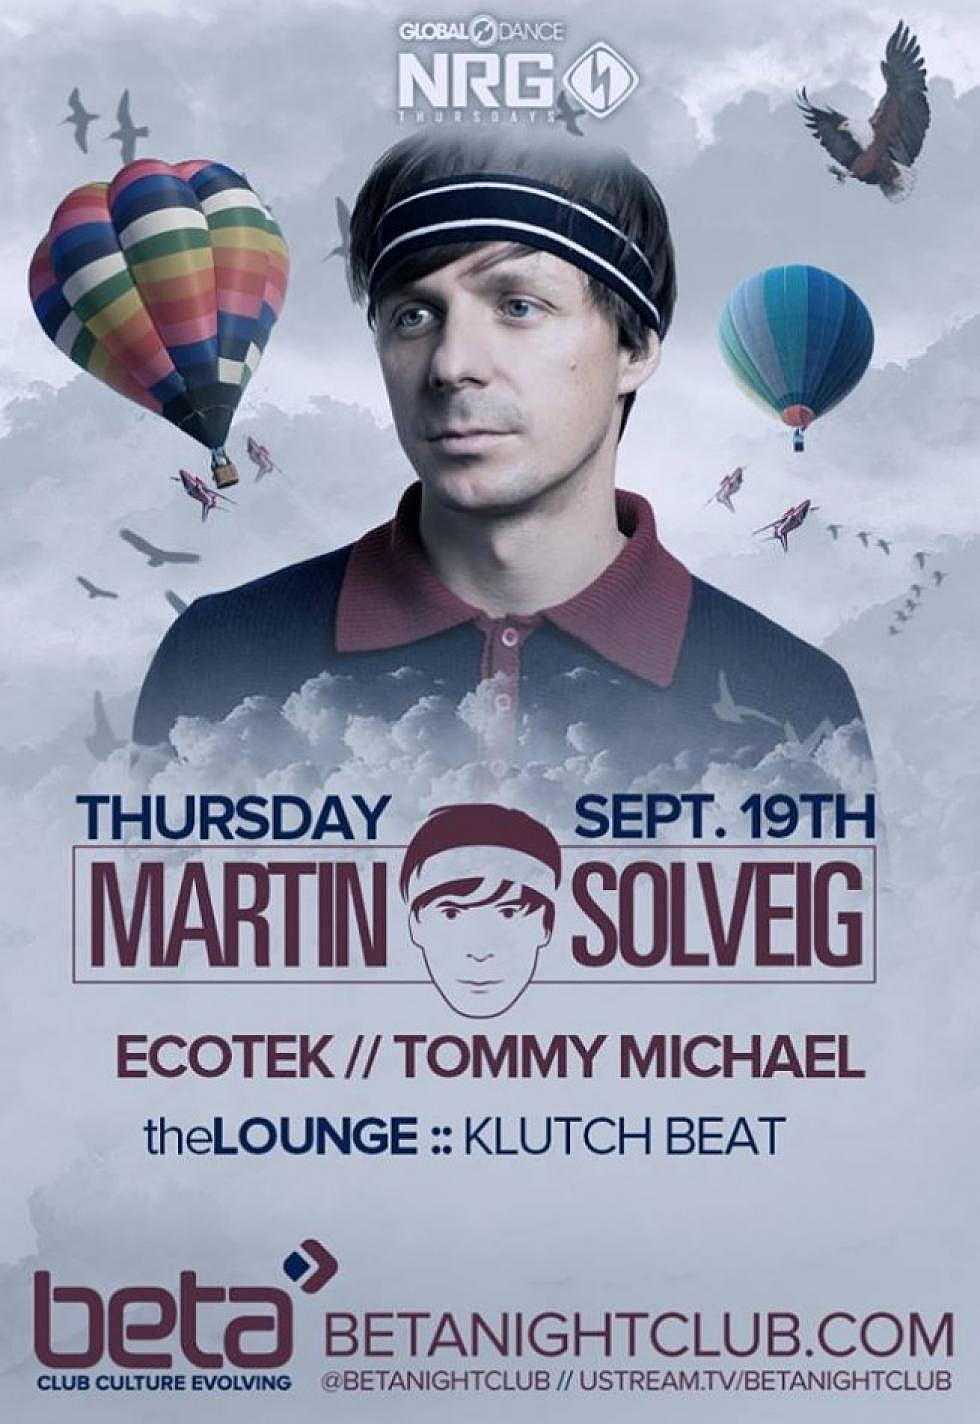 Martin Solveig to perform at Charity event at Beta Nightclub tomorrow night for those affected by recent Colorado floodings